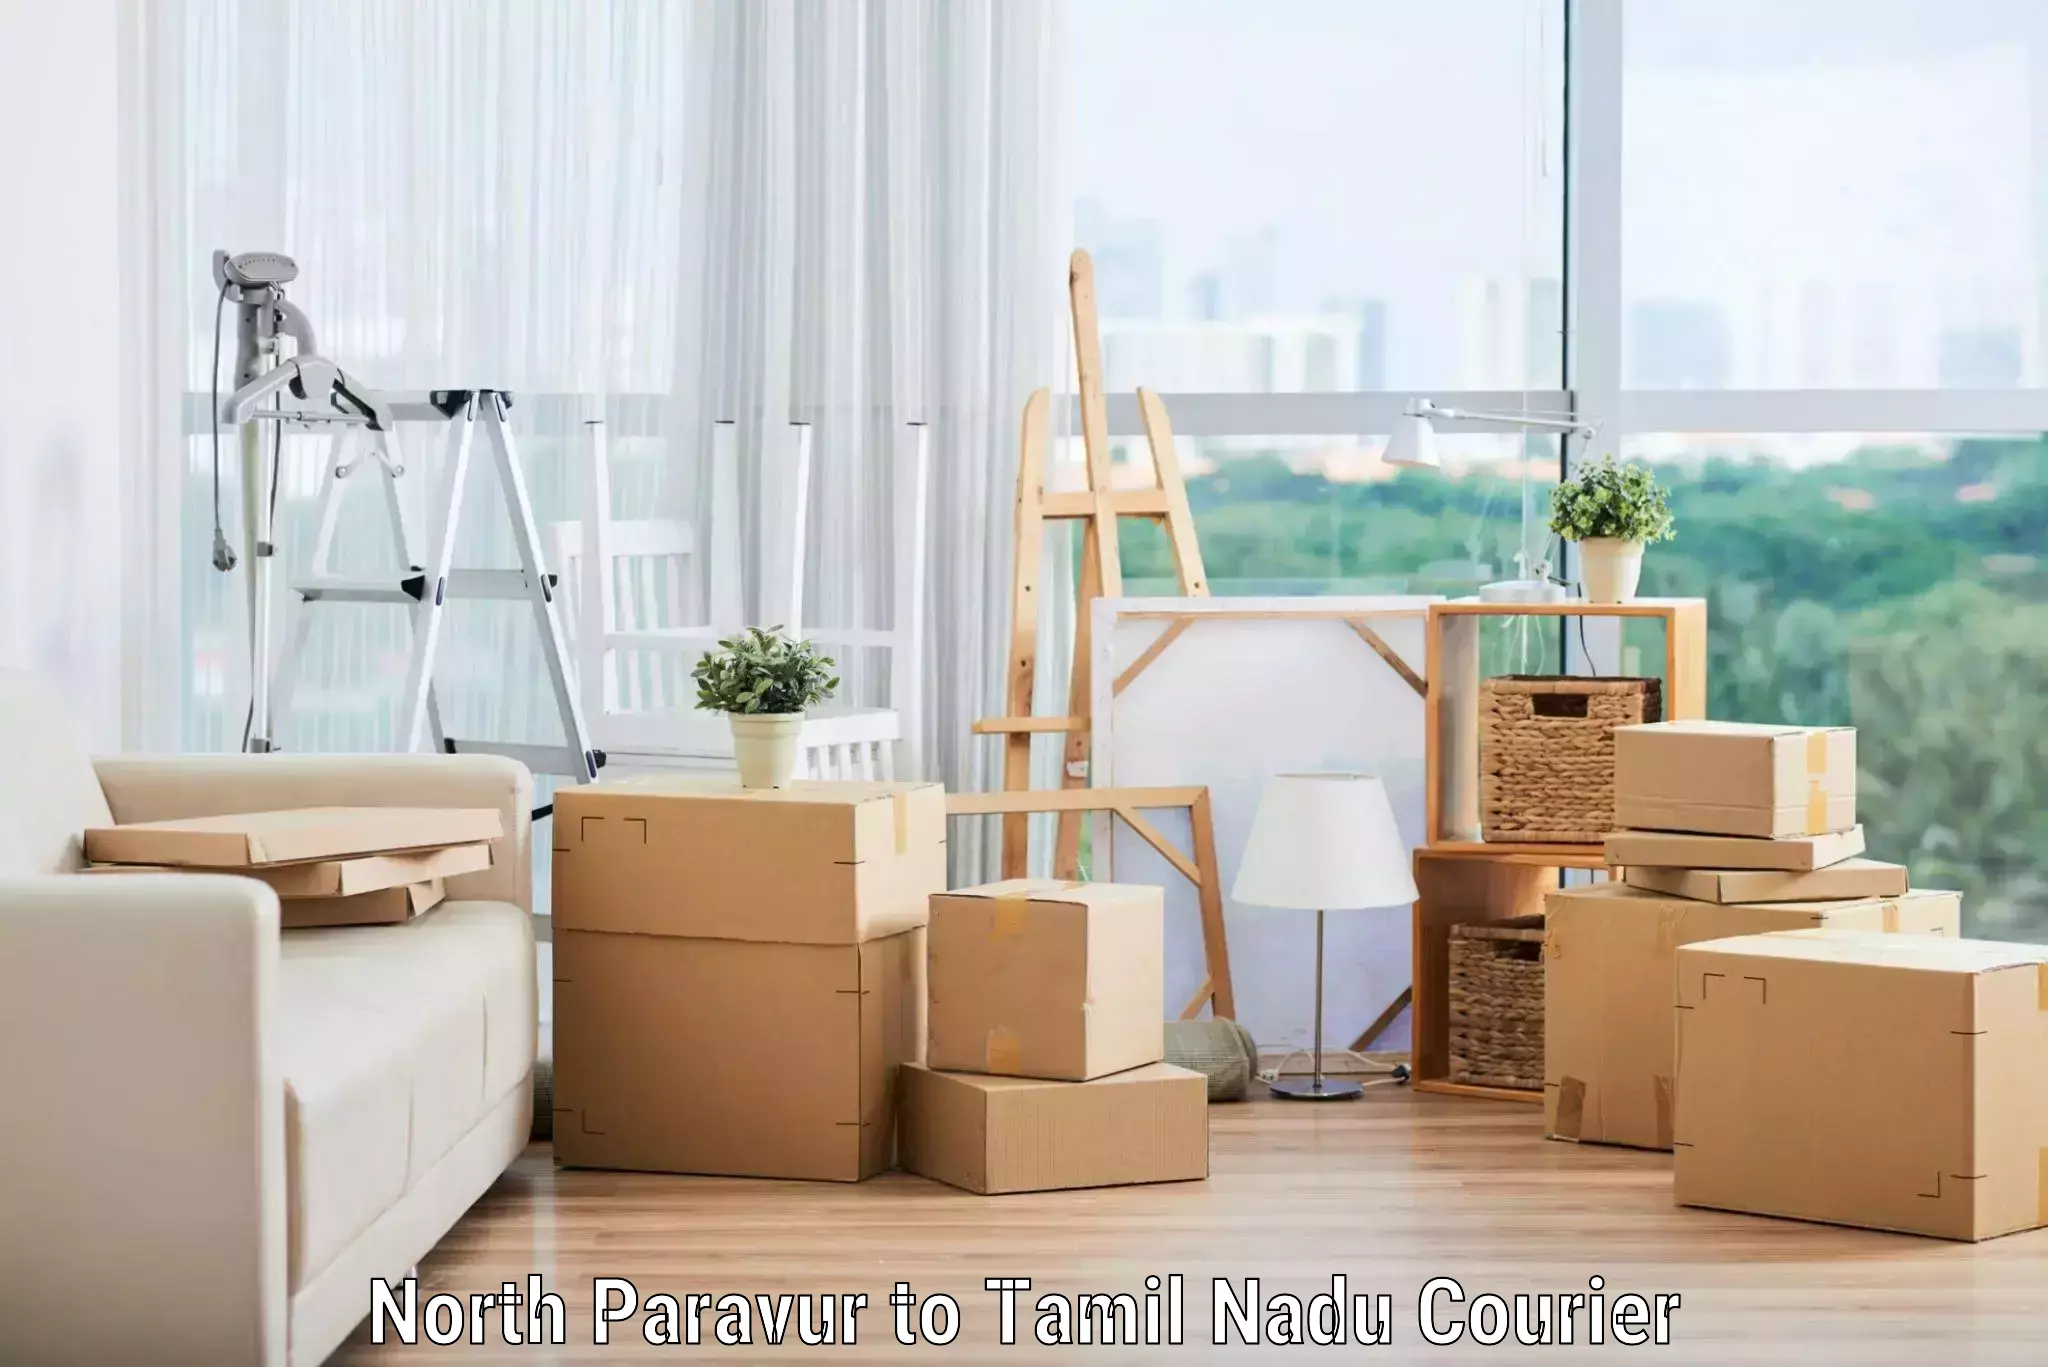 Furniture delivery service North Paravur to Ariyalur